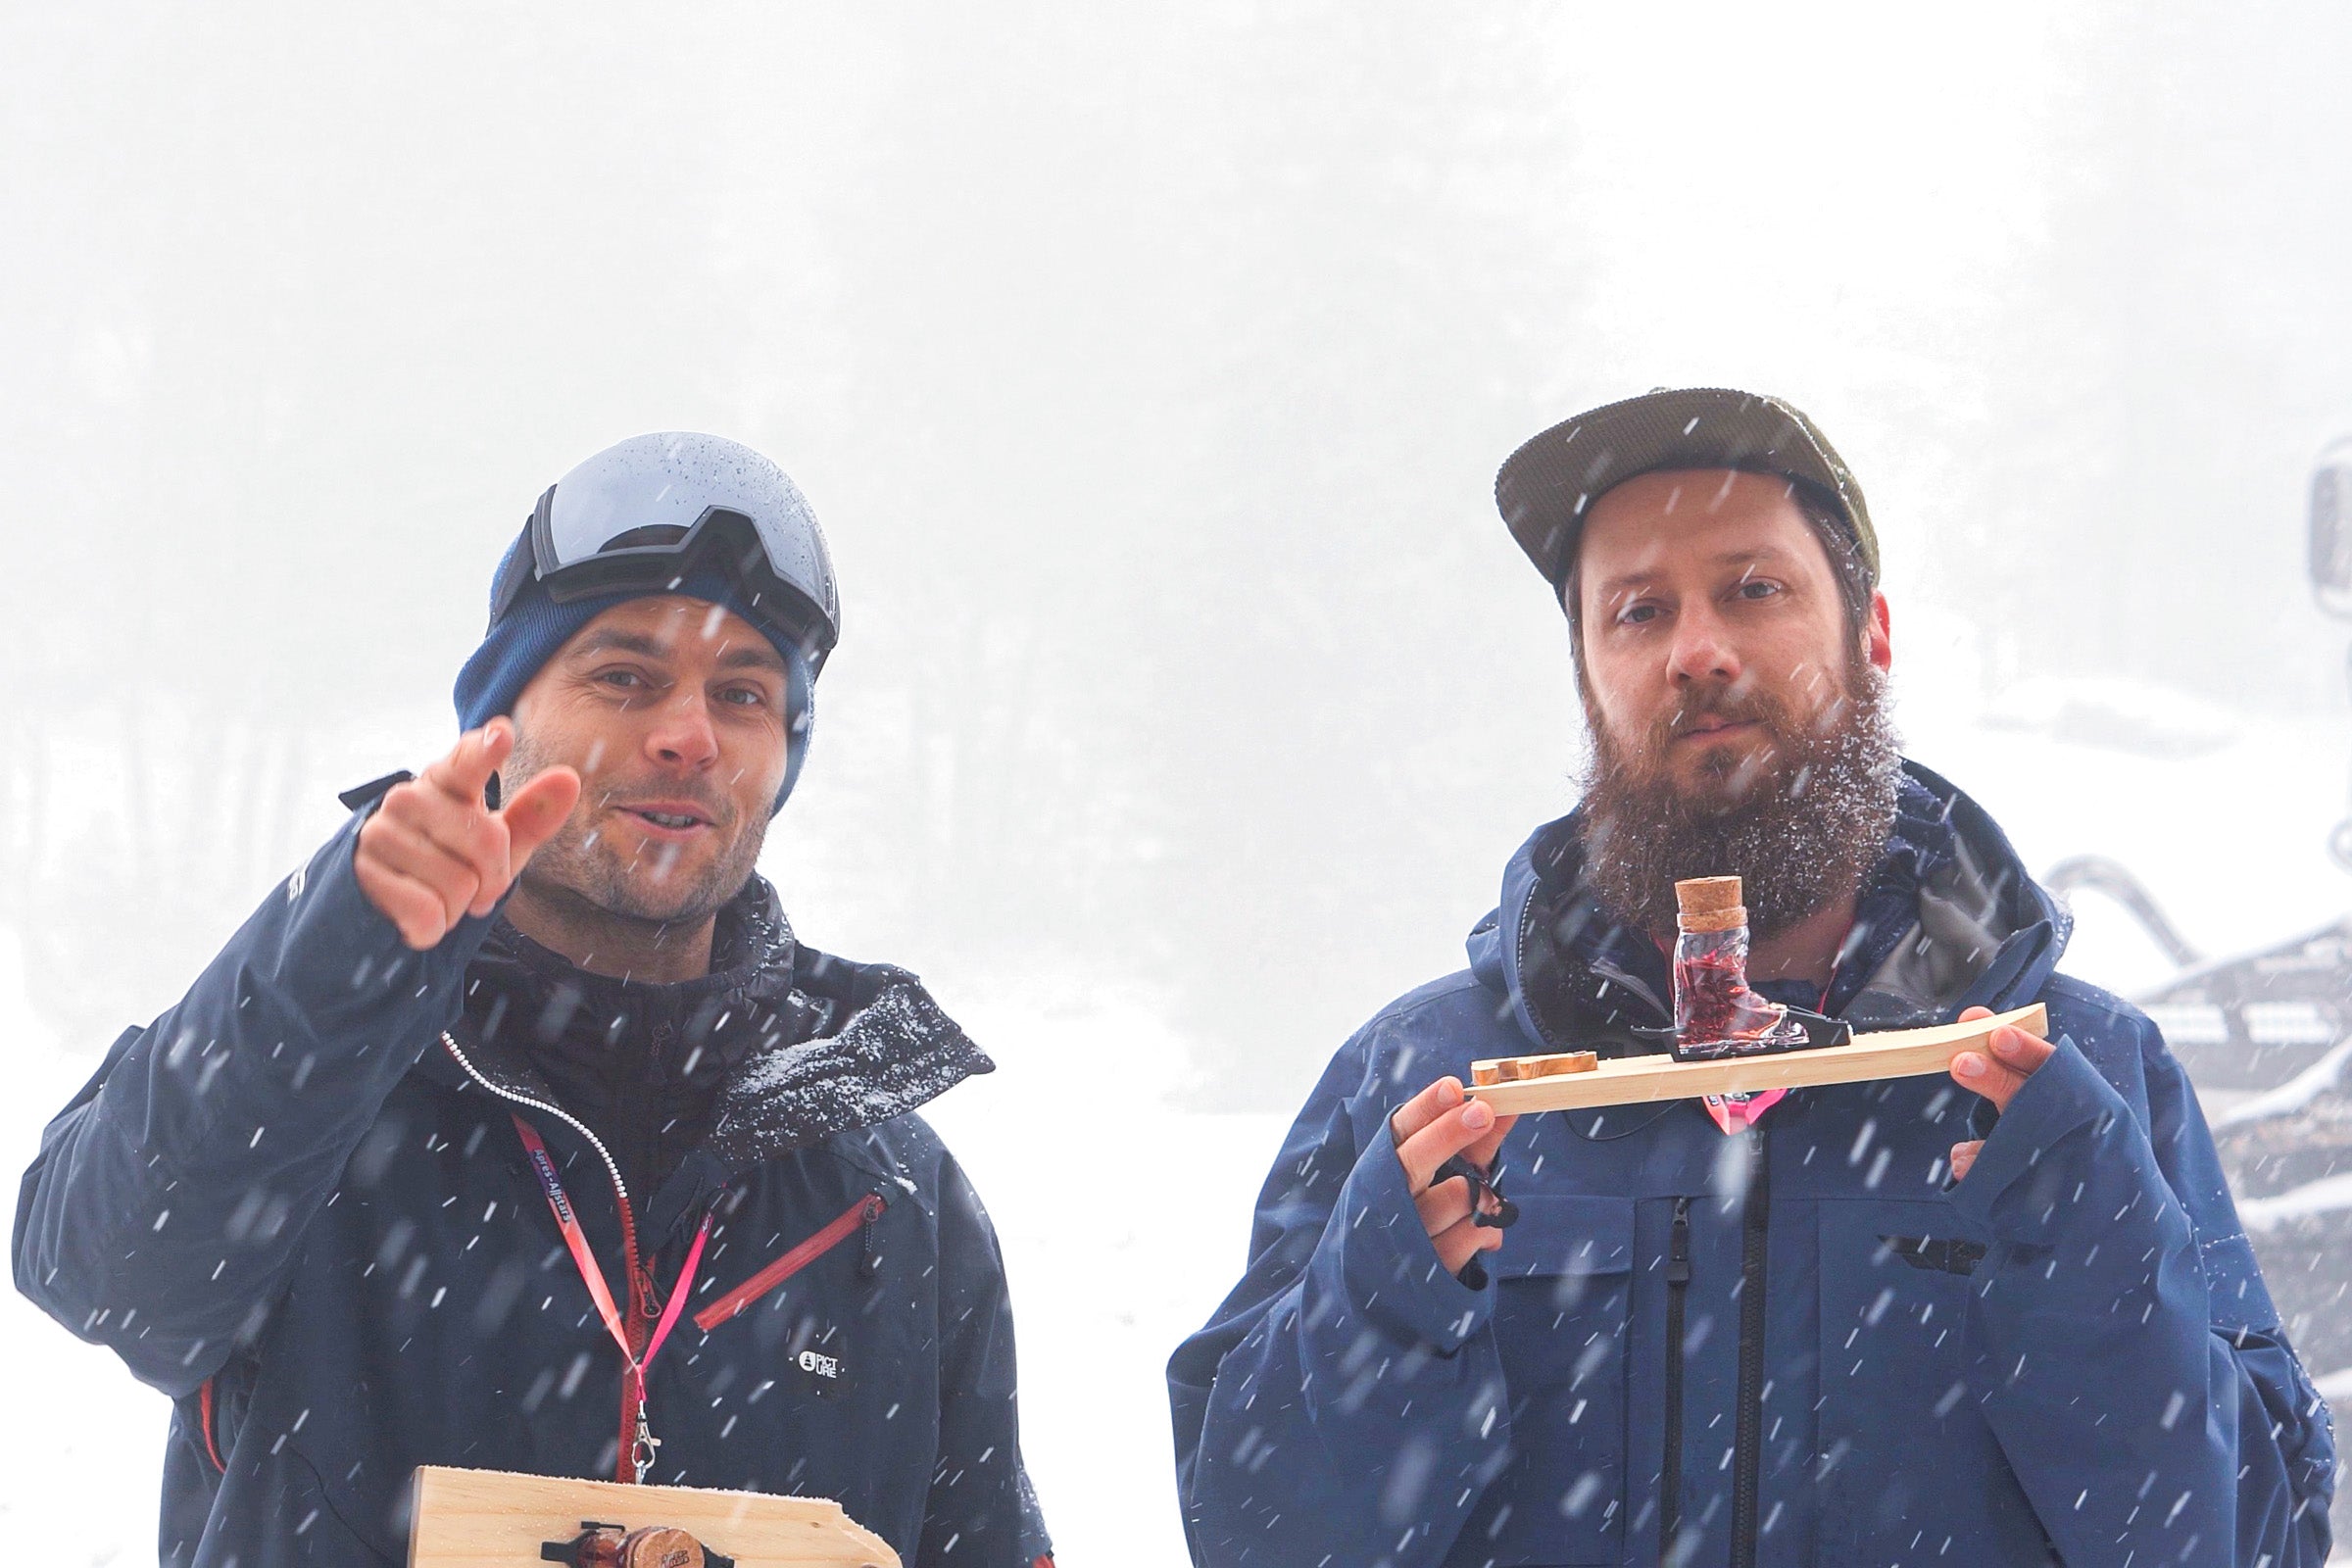 Tobi & Michi: Apres Allstar founders standing outsided while it is snowing and showing off the mini ski product.